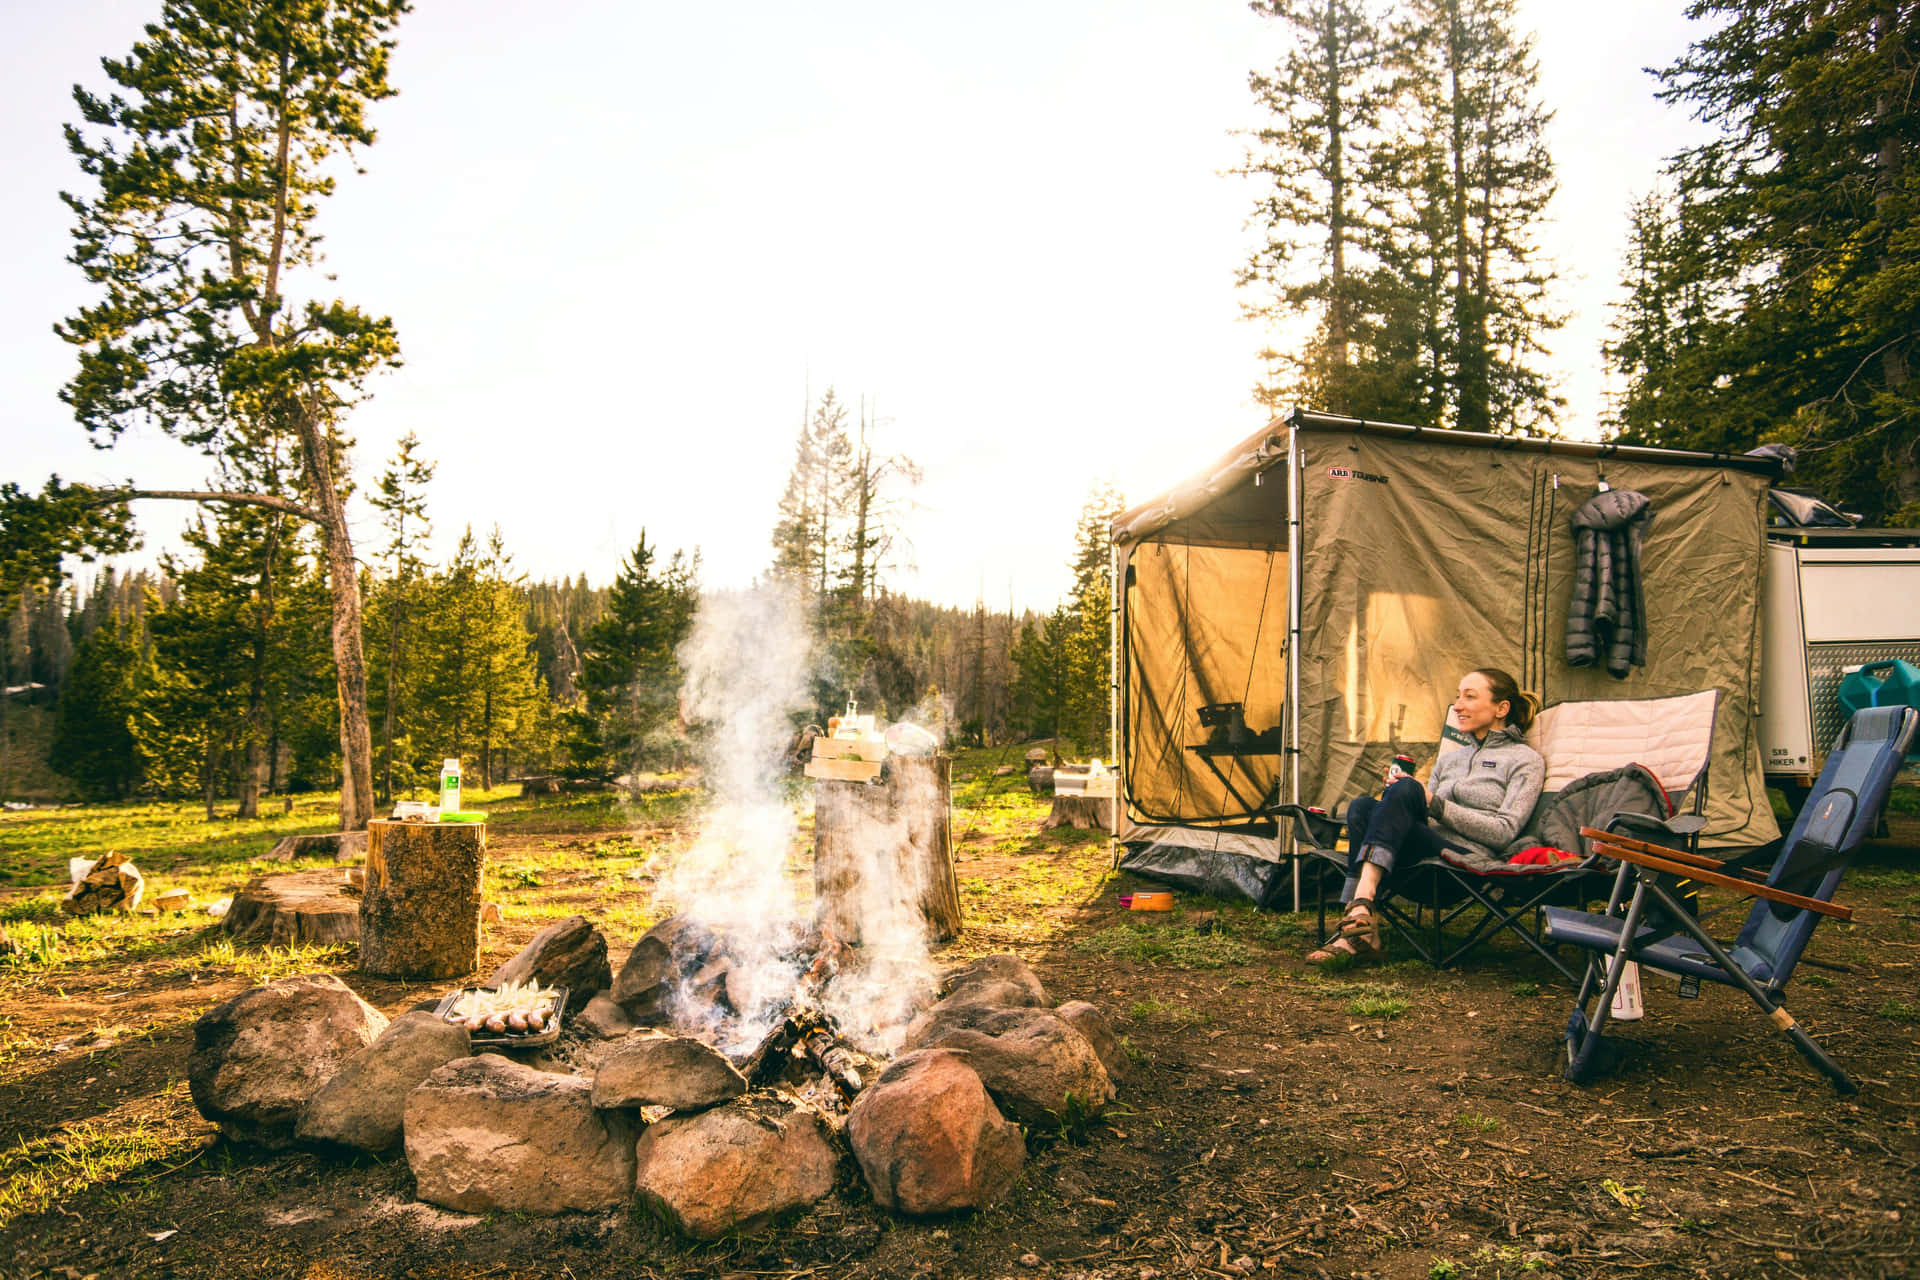 Enjoy Nature's Finest Moments with an Unforgettable Camping Trip